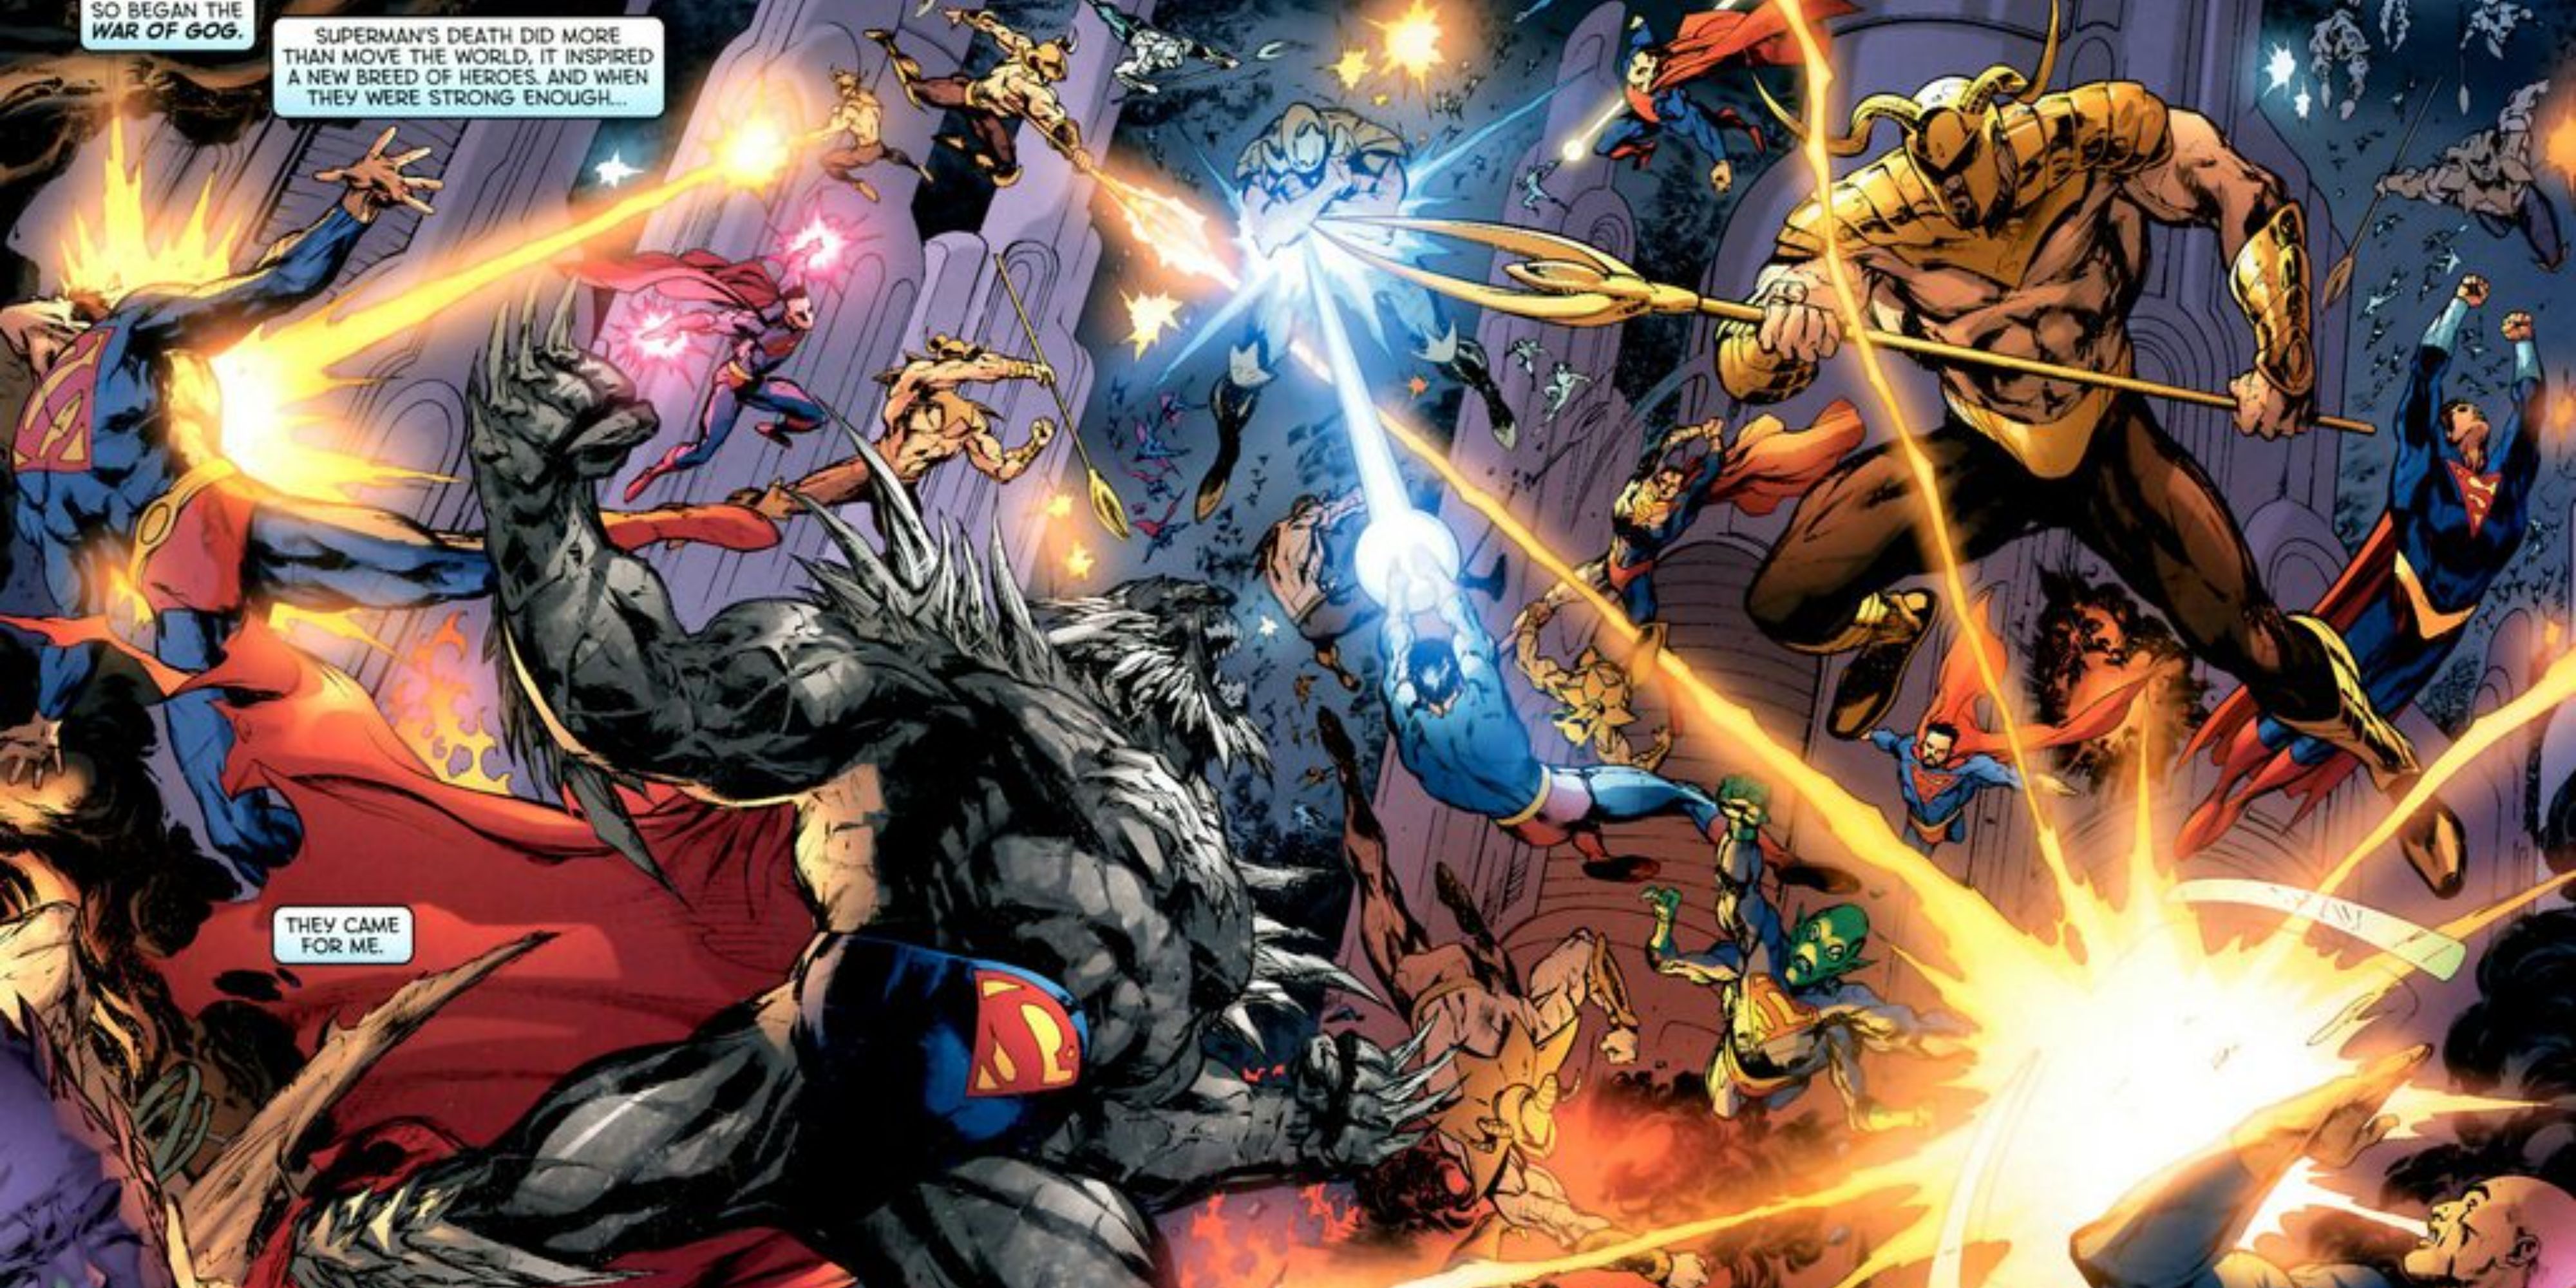 Doomsday leads a group of Supermen against Gog.